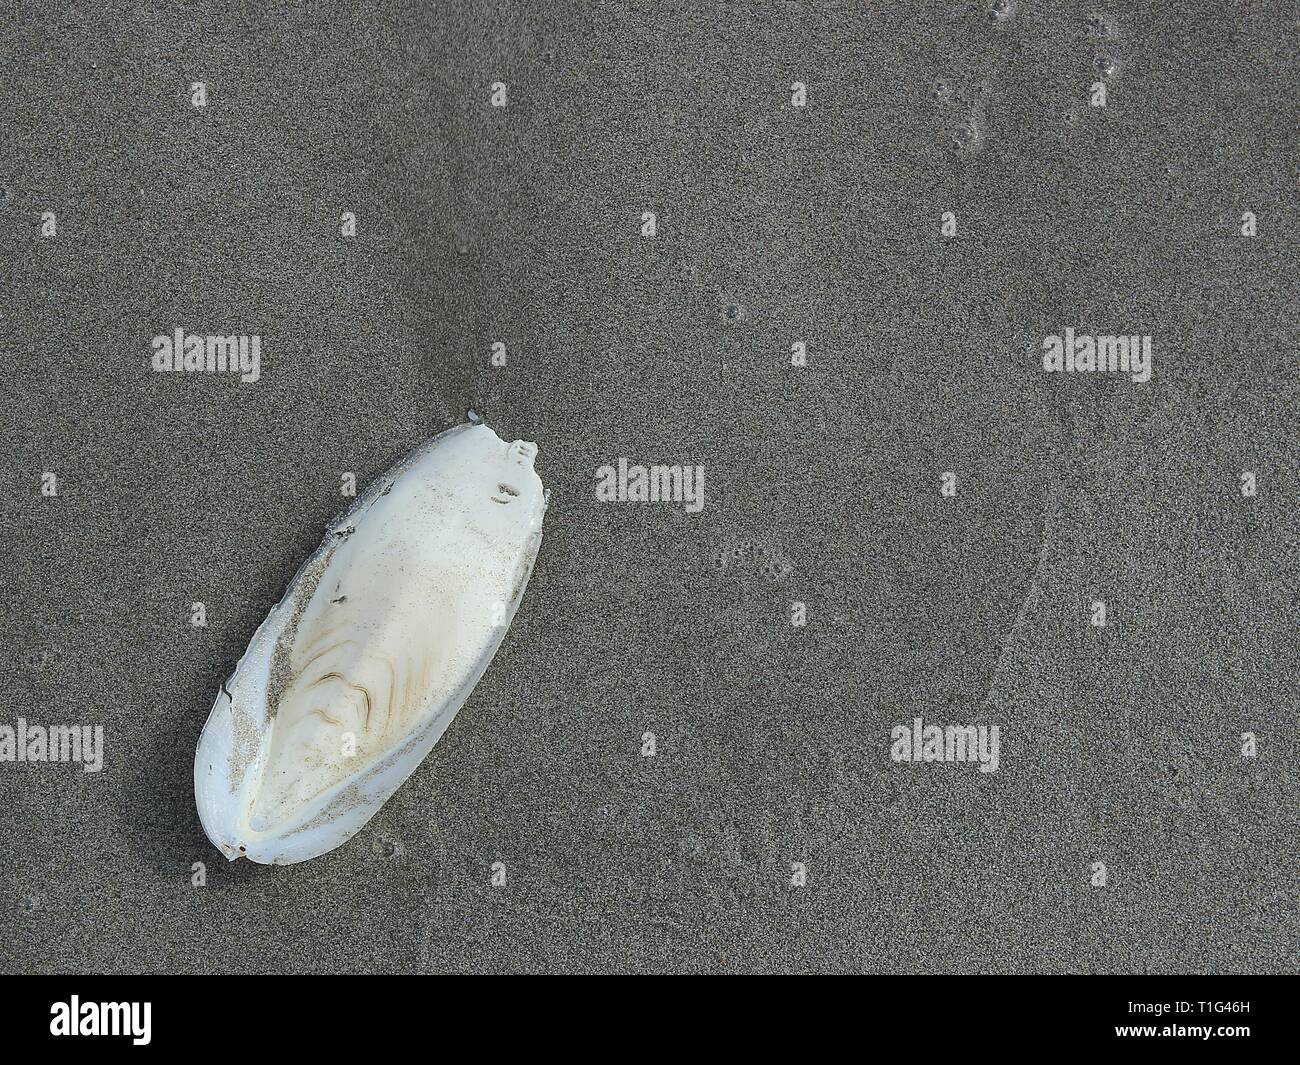 Close up one cuttlefish bone washed up from sea wave at a beach with black grey sand Stock Photo